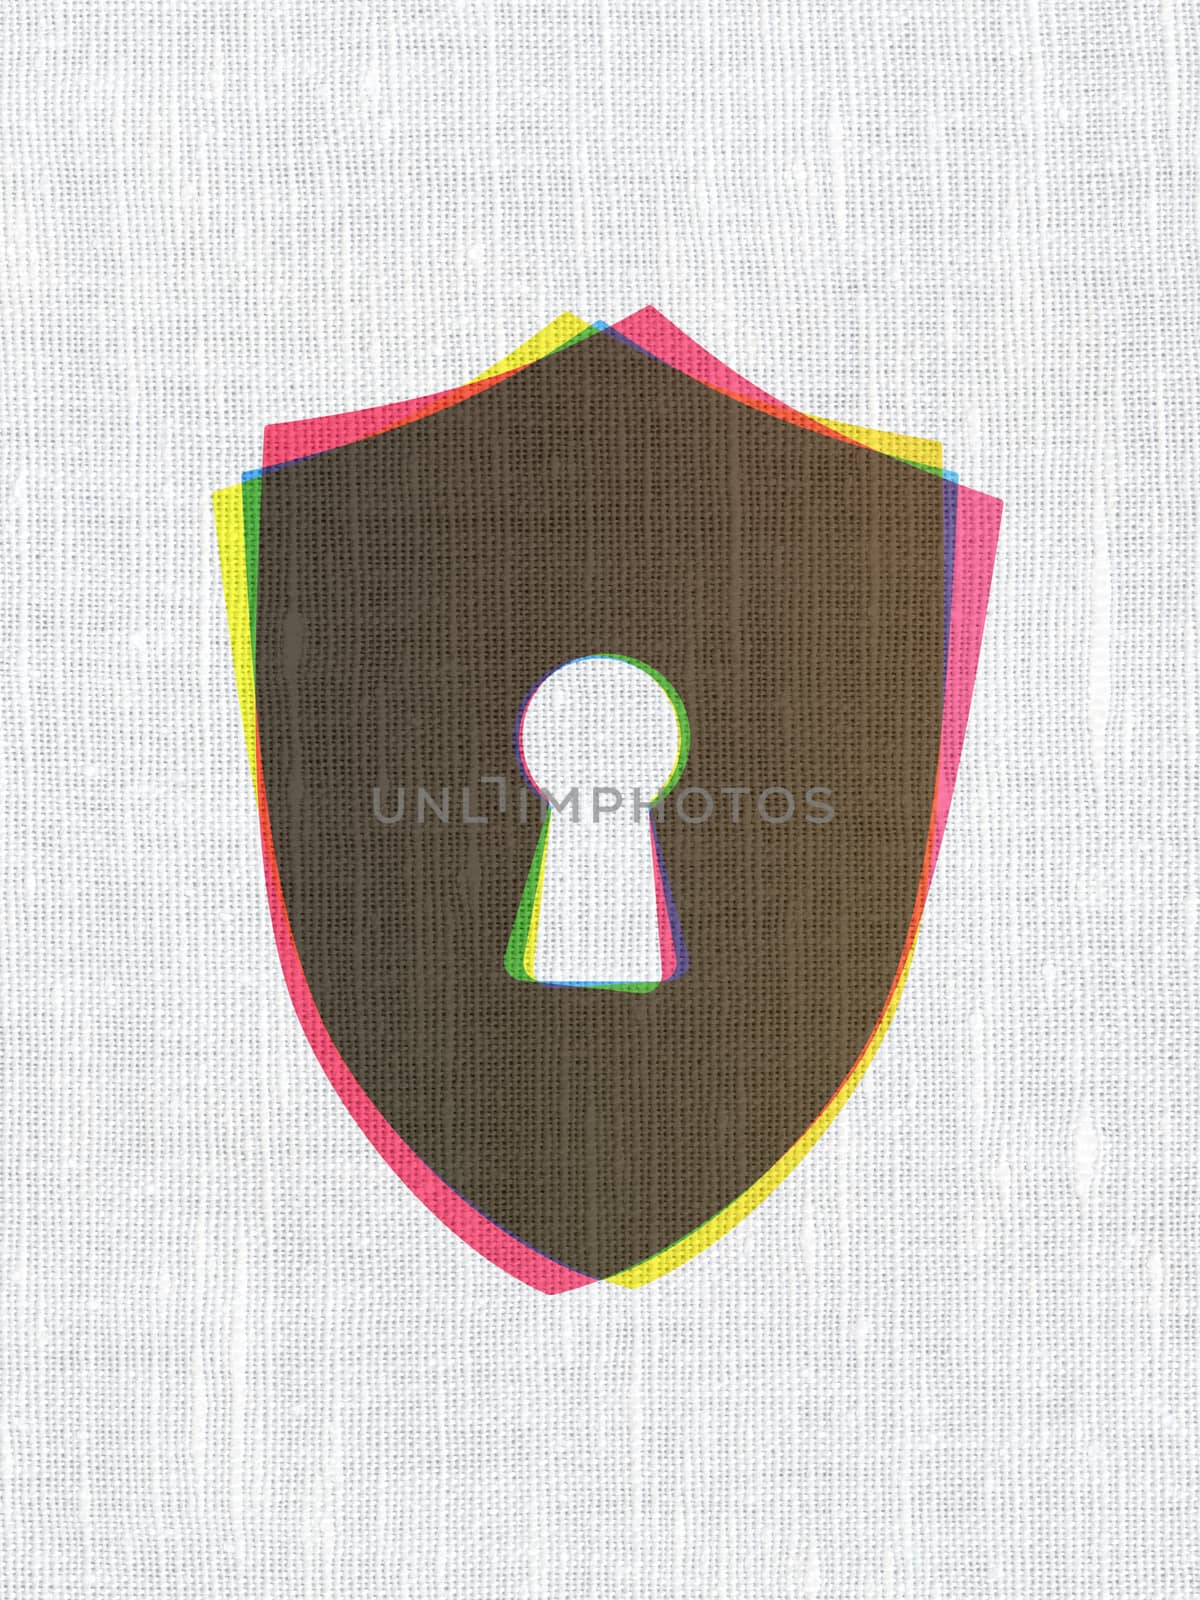 Safety concept: Shield With Keyhole on fabric texture background by maxkabakov